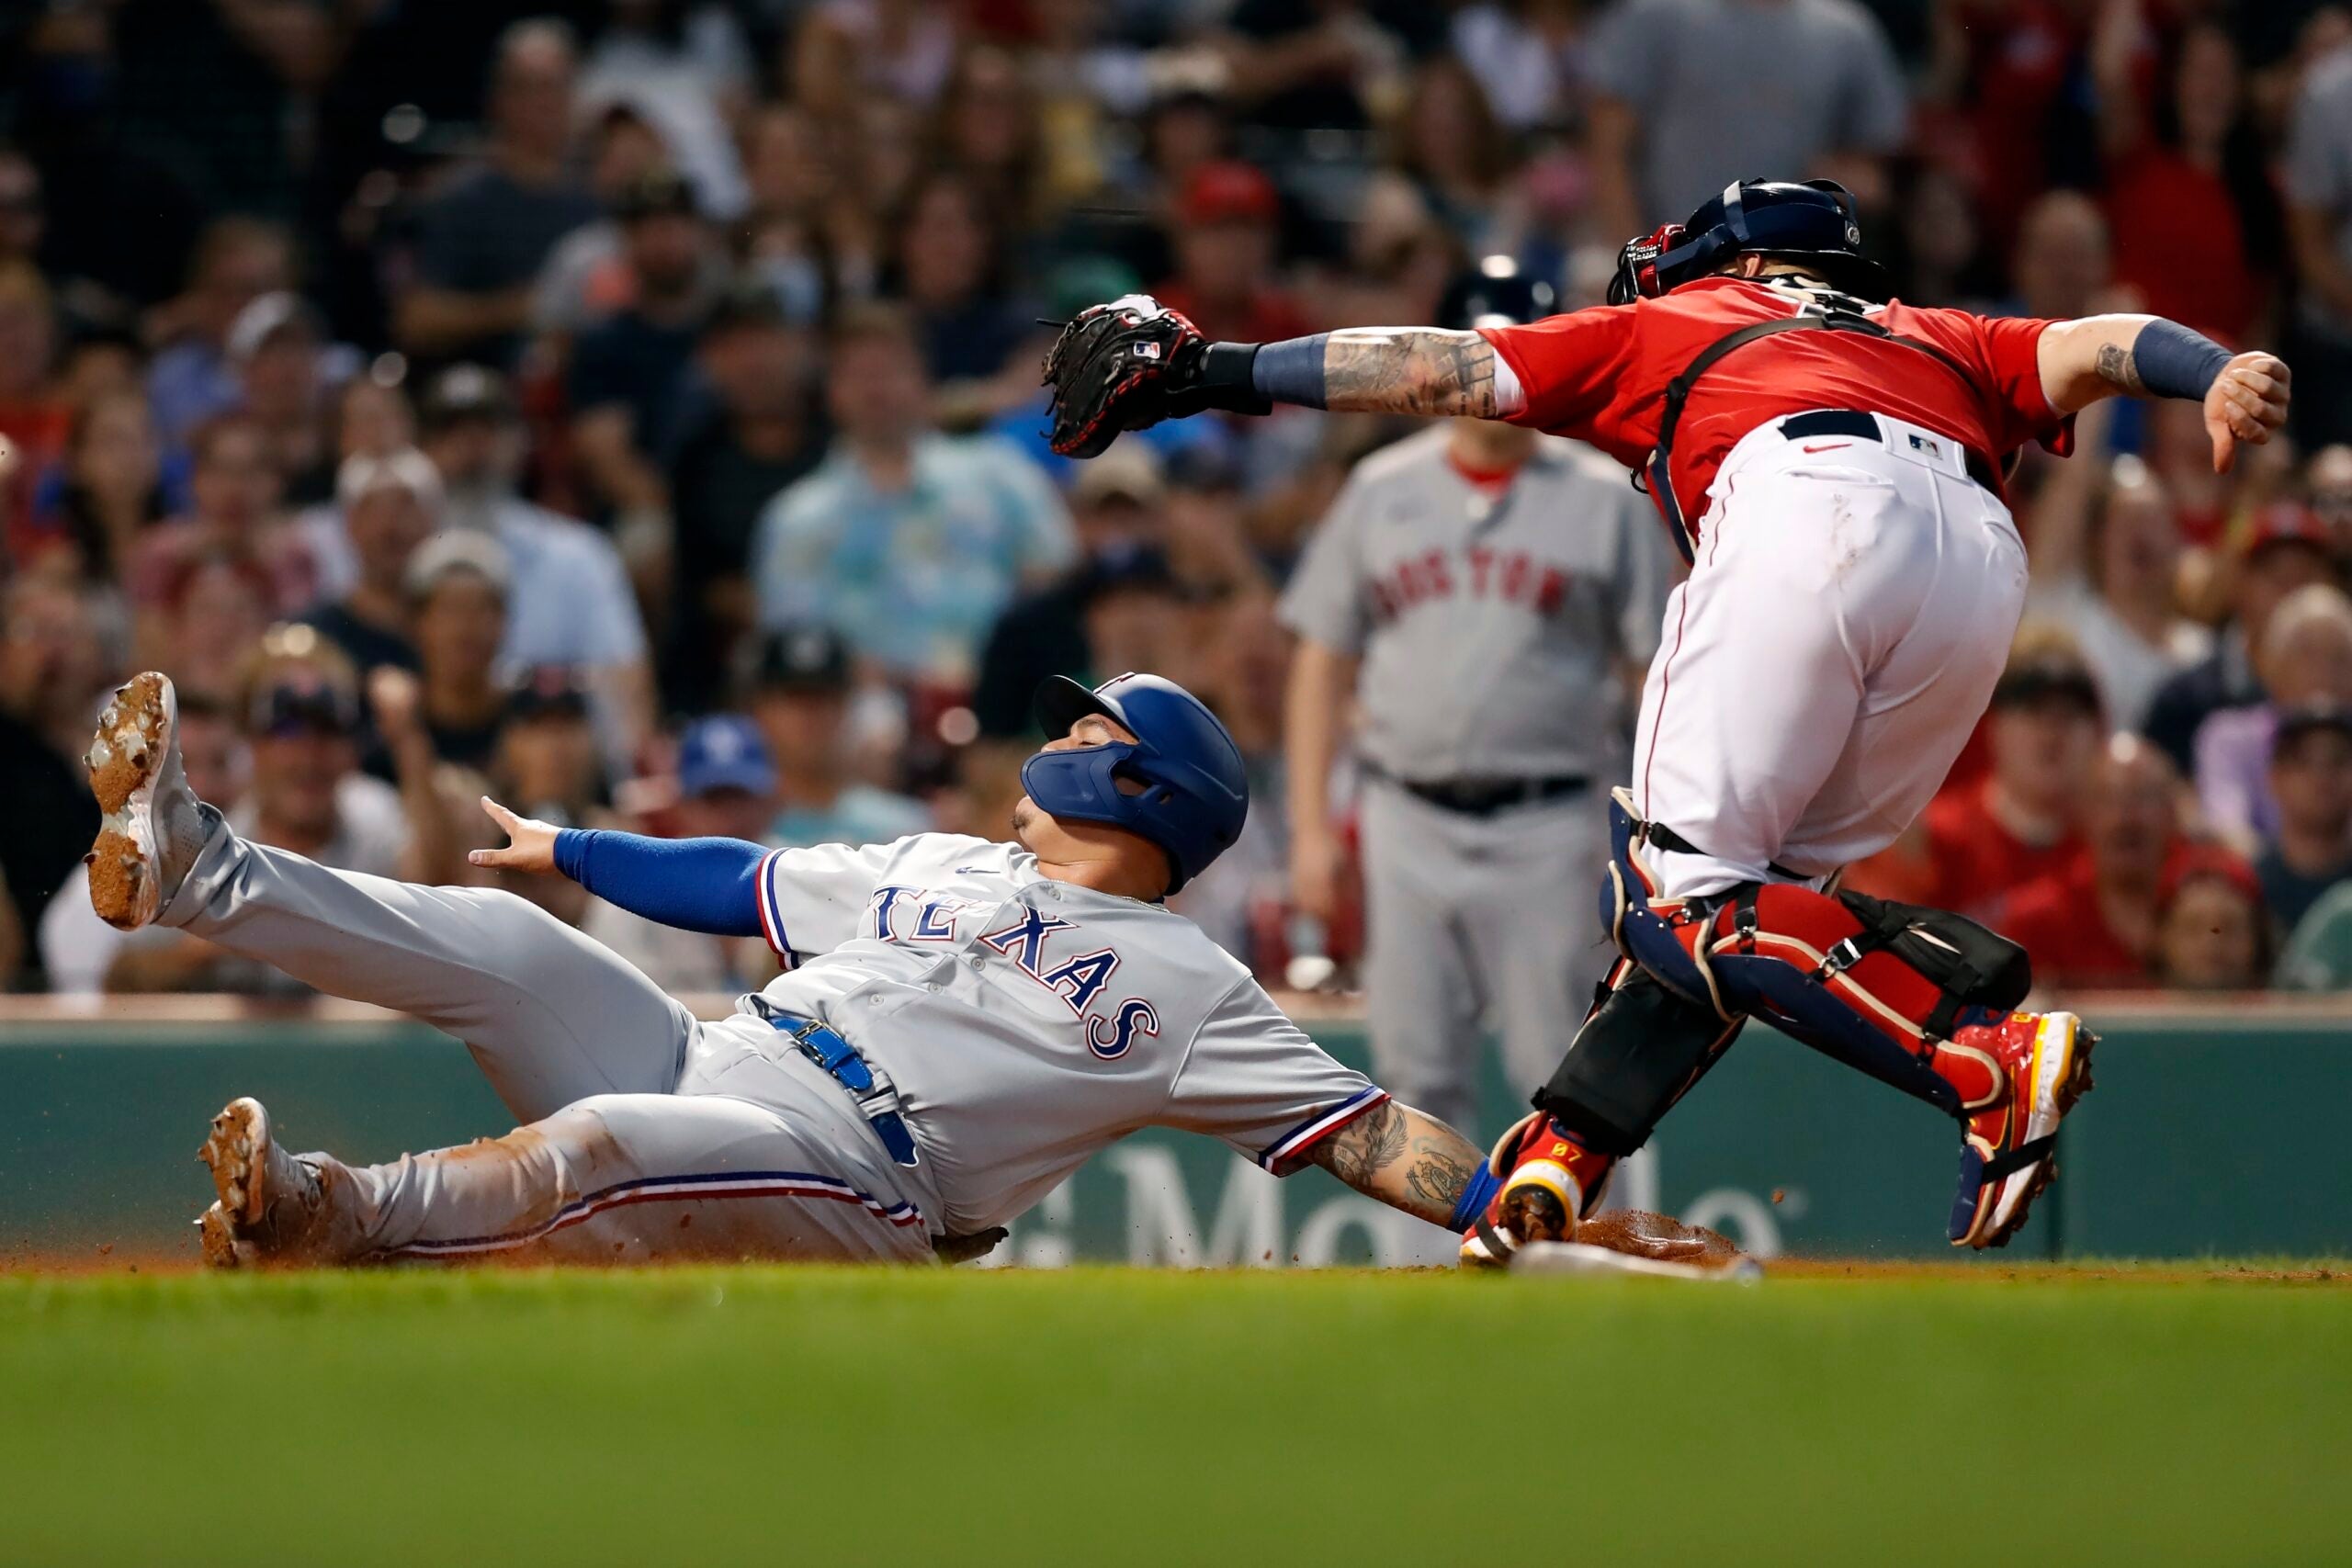 Red Sox' bats struggle again in 101 loss to the Rangers